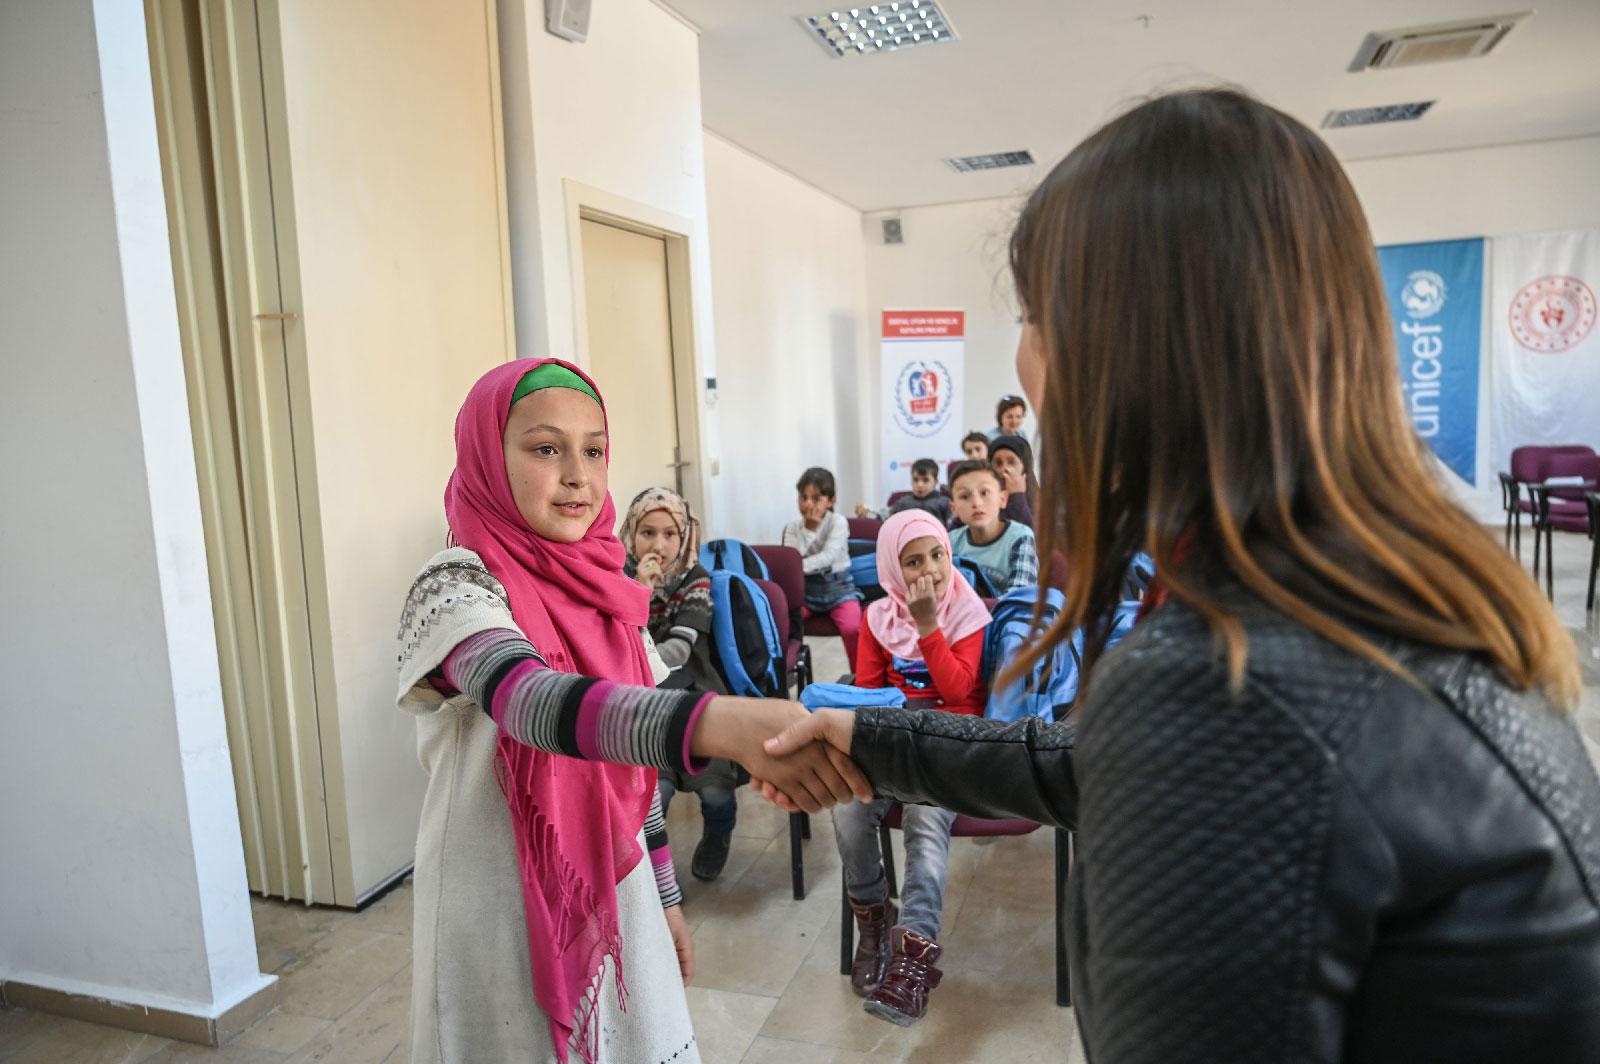 A teacher gives Turkish language lessons to Syrian children at Turkish Youth and Sport Center (Genclik ve Spor Merkezi) in Adana on March 18, 2019.